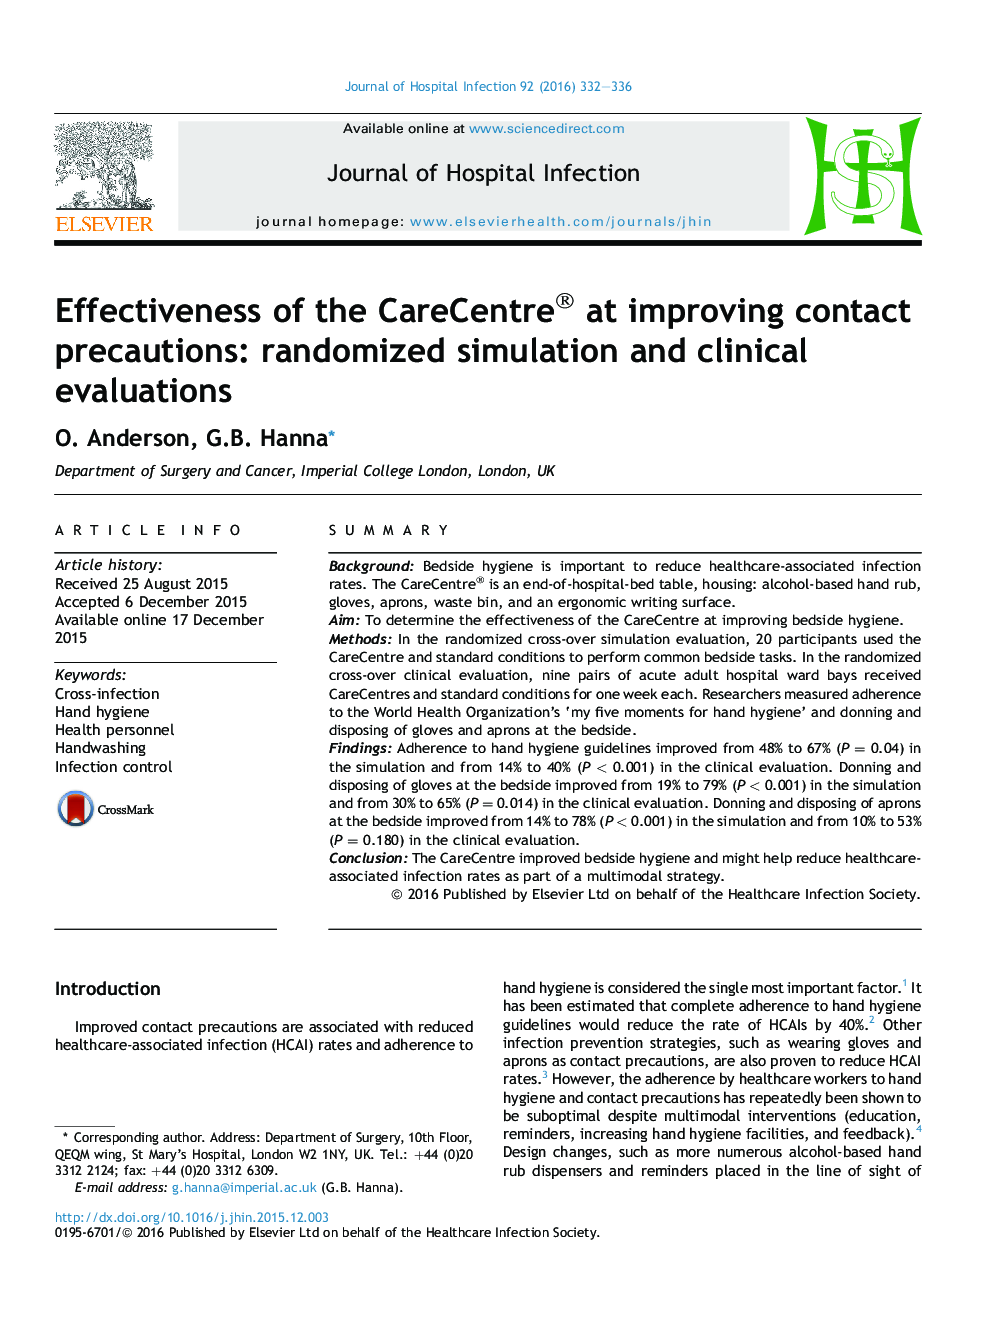 Effectiveness of the CareCentre® at improving contact precautions: randomized simulation and clinical evaluations